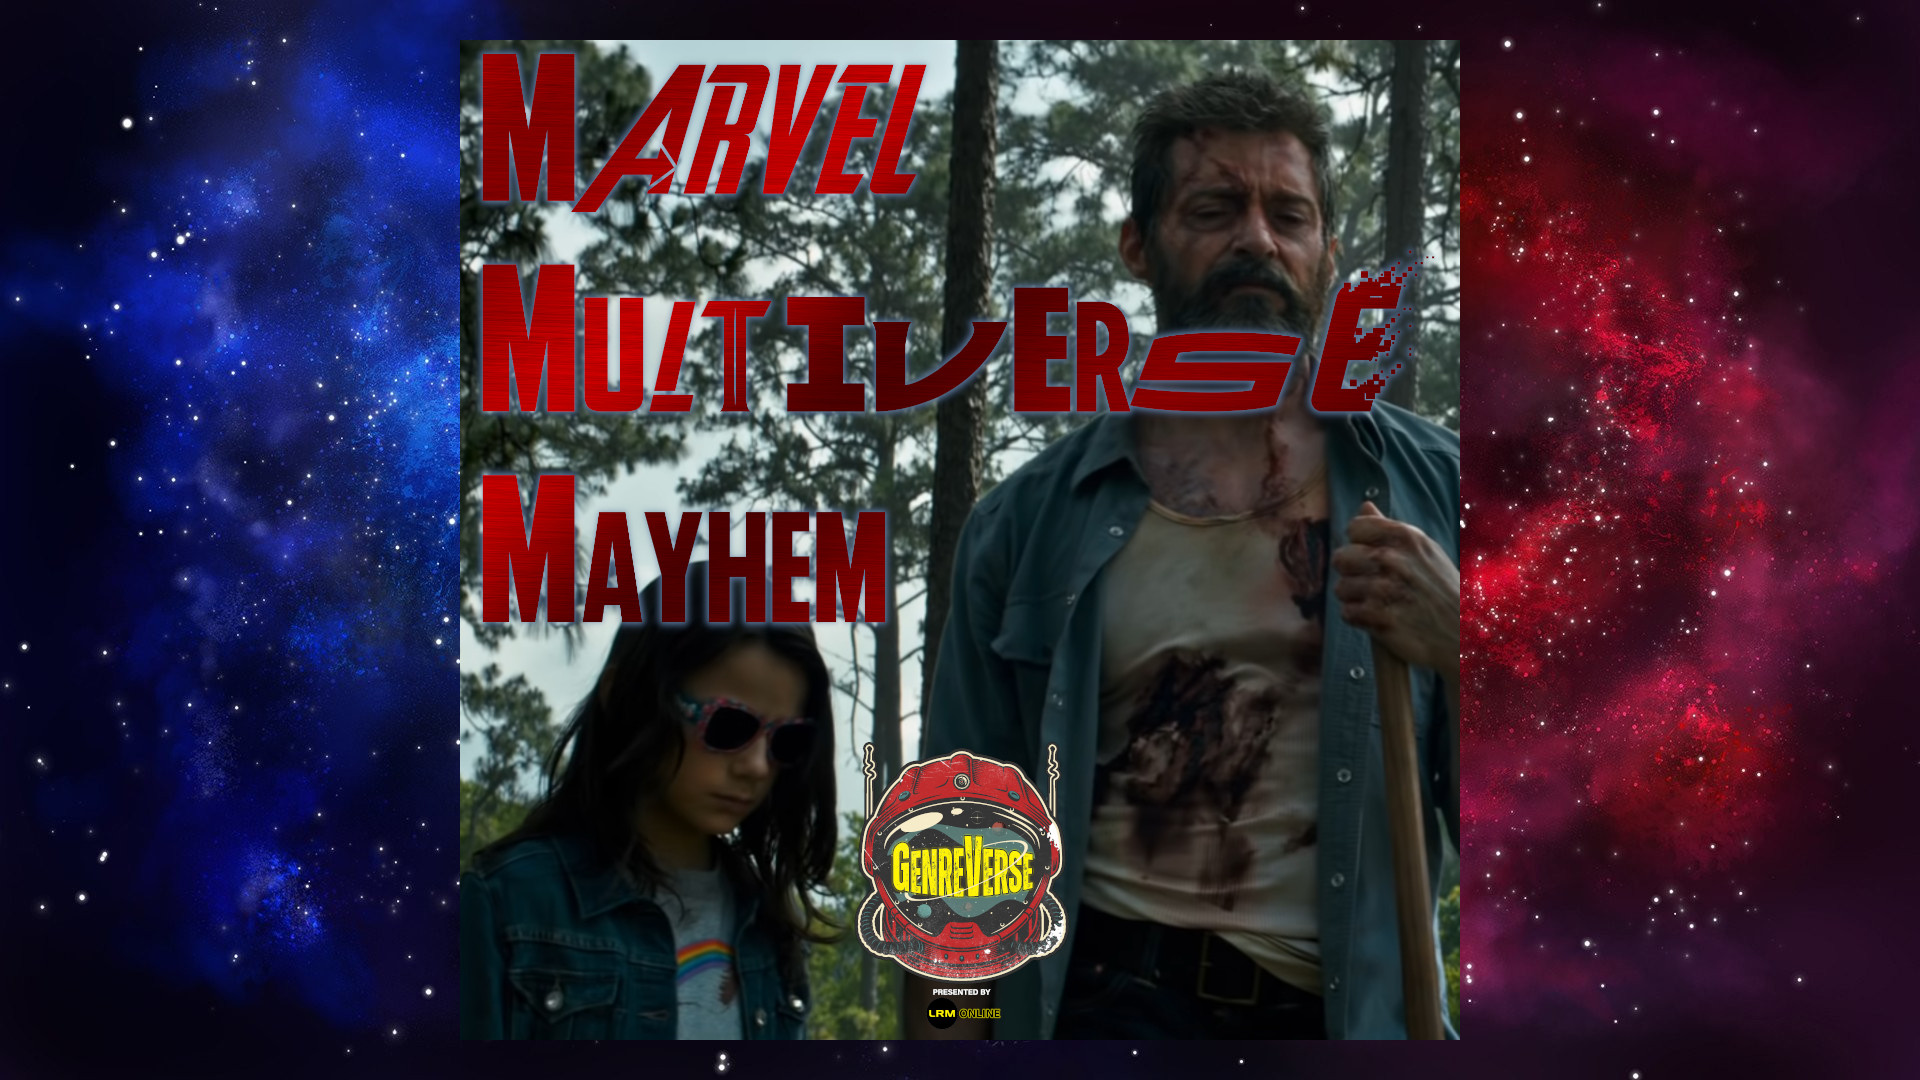 Logan Review Nick Thinks This Is The Best FFoX-Men Movie Ever Kyle Is Wrong Marvel Multiverse Mayhem YouTube